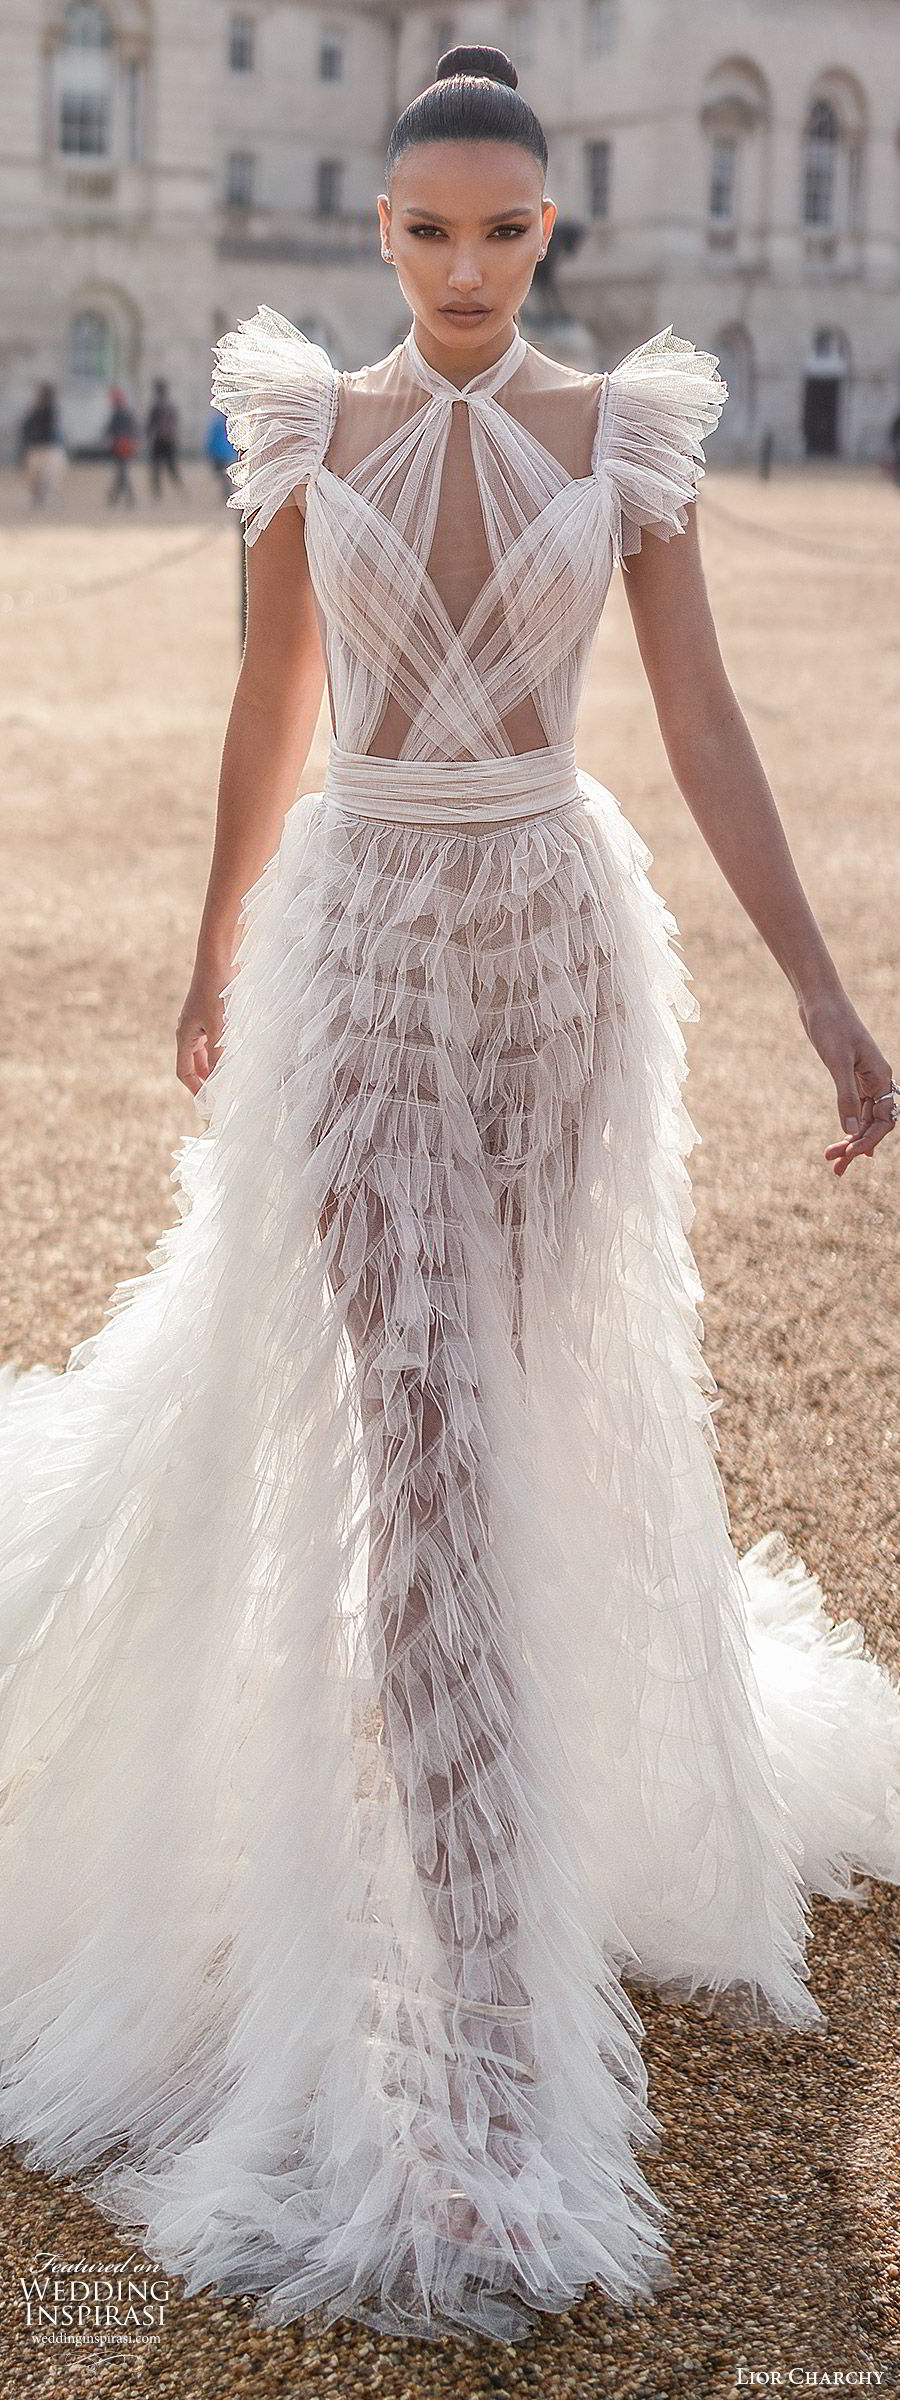 lior charchy 2019 bridal flutter sleeves illusion high neckline ruched sheer bodice tiered ruffle skirt modified a line wedding dress (1) romantic boho modern cathedral train lv